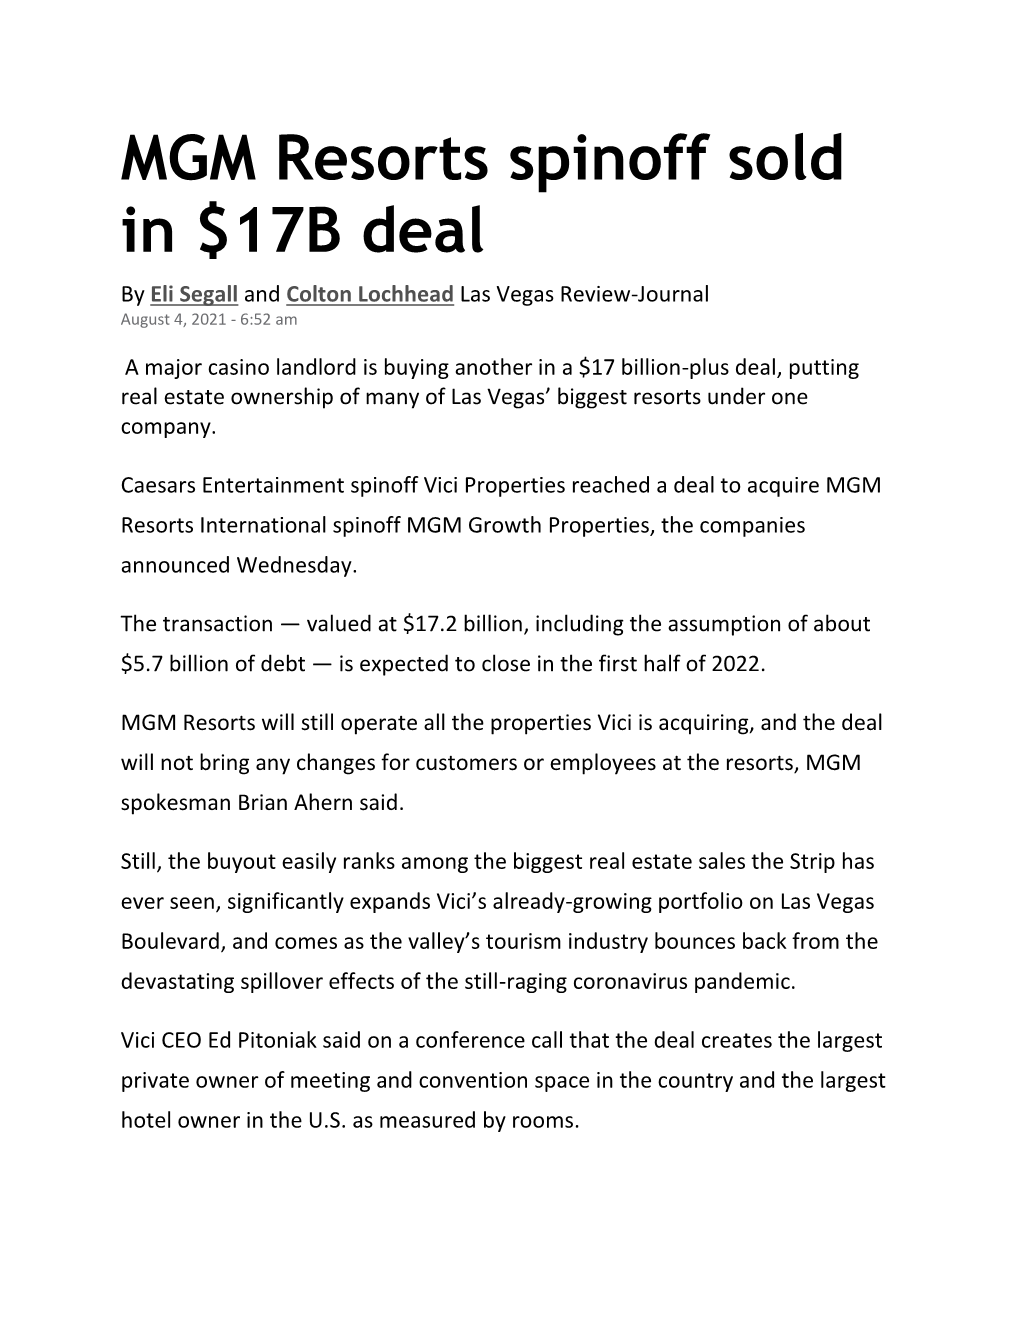 MGM Resorts Spinoff Sold in $17B Deal by Eli Segall and Colton Lochhead Las Vegas Review-Journal August 4, 2021 - 6:52 Am